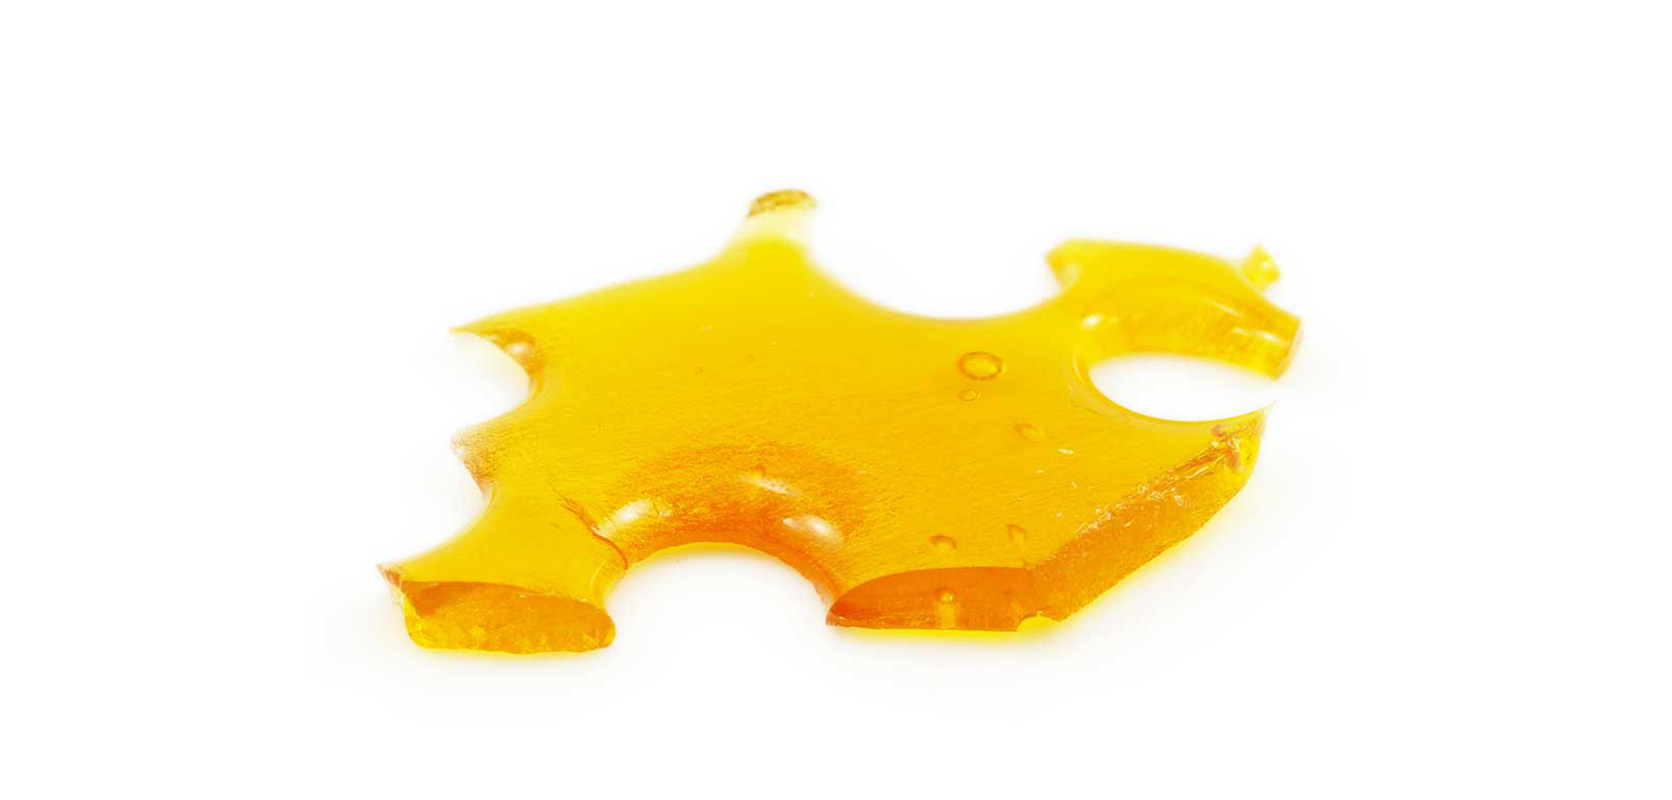 Girl Scout Cookies shatter concentrate dab drub fro sale online in Canada at Low Price Bud mail order marijuana weed store and cannabis dispensary. 